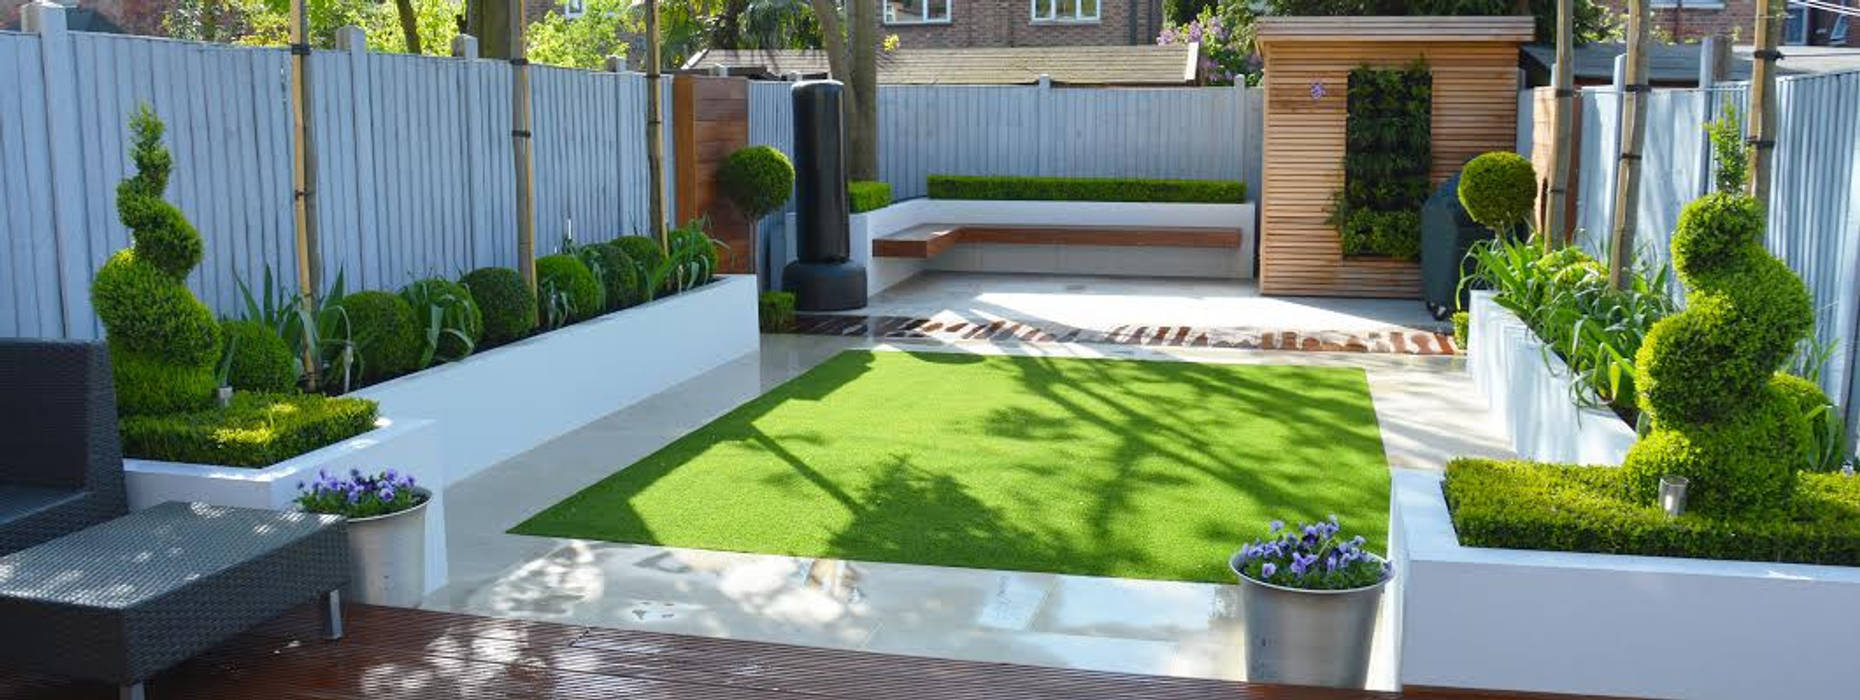 Minimalist Garden: Amazing relaxing space that you will fall in love with, Landscaper in London Landscaper in London สวน